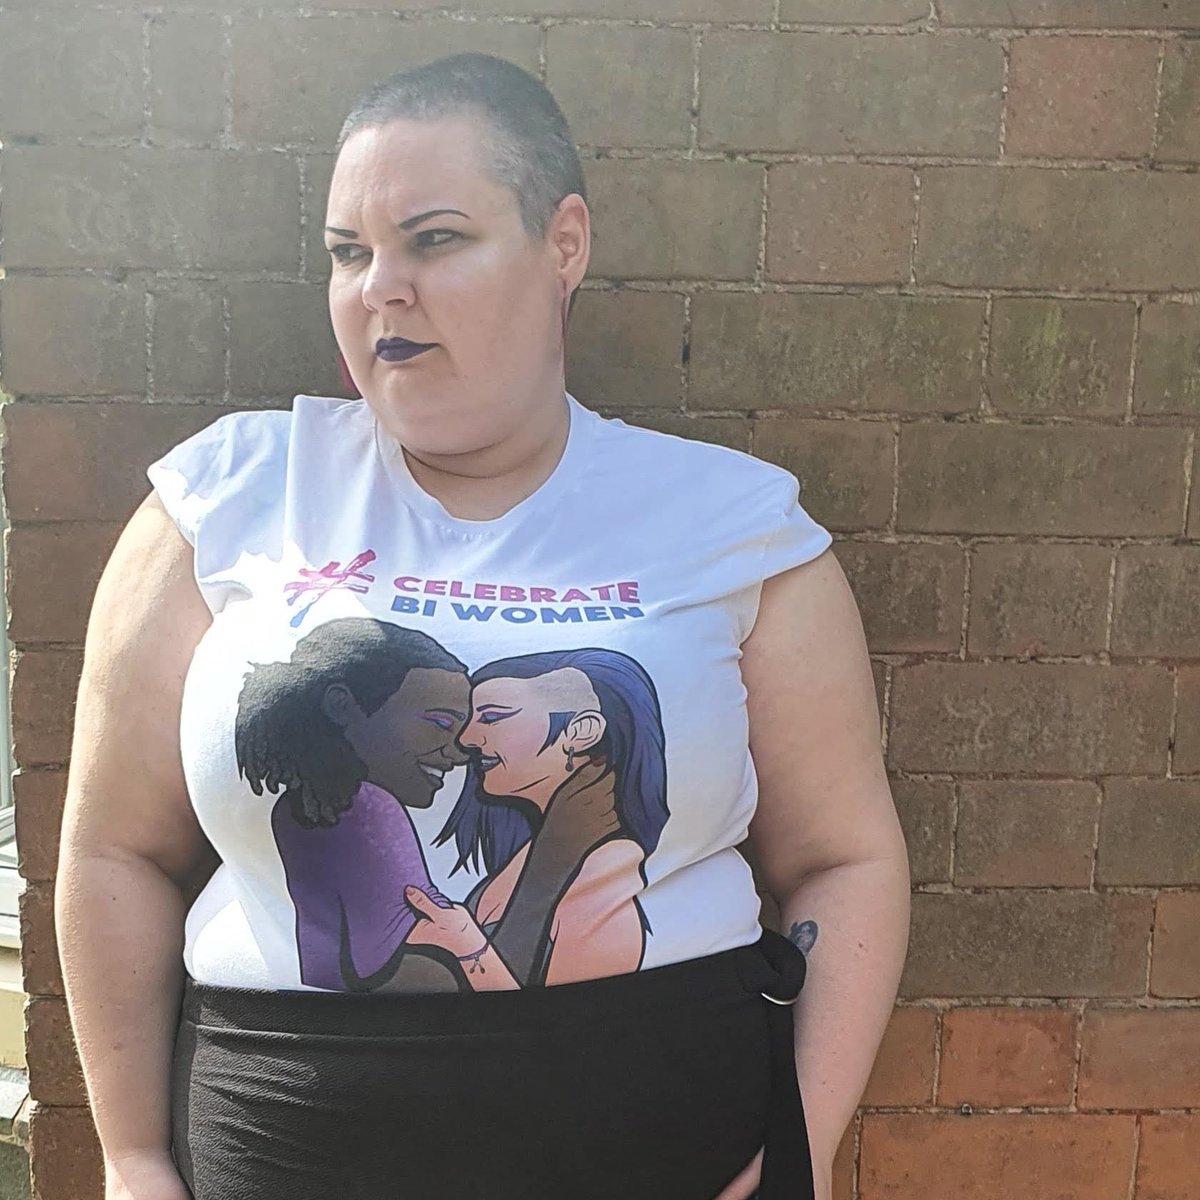 And another!!  #CelebrateBiWomen Shirt by  @RainbowandCoUK Modelled by  @LibbyLights  by  @we_are_biscuit Design by @ chrismorristattoos on InstagramGet your own:  https://rainbowandco.uk/products/celebratebiwomen-graphic-t-shirt(PLEASE RT)  #BeautifullyBisexual 